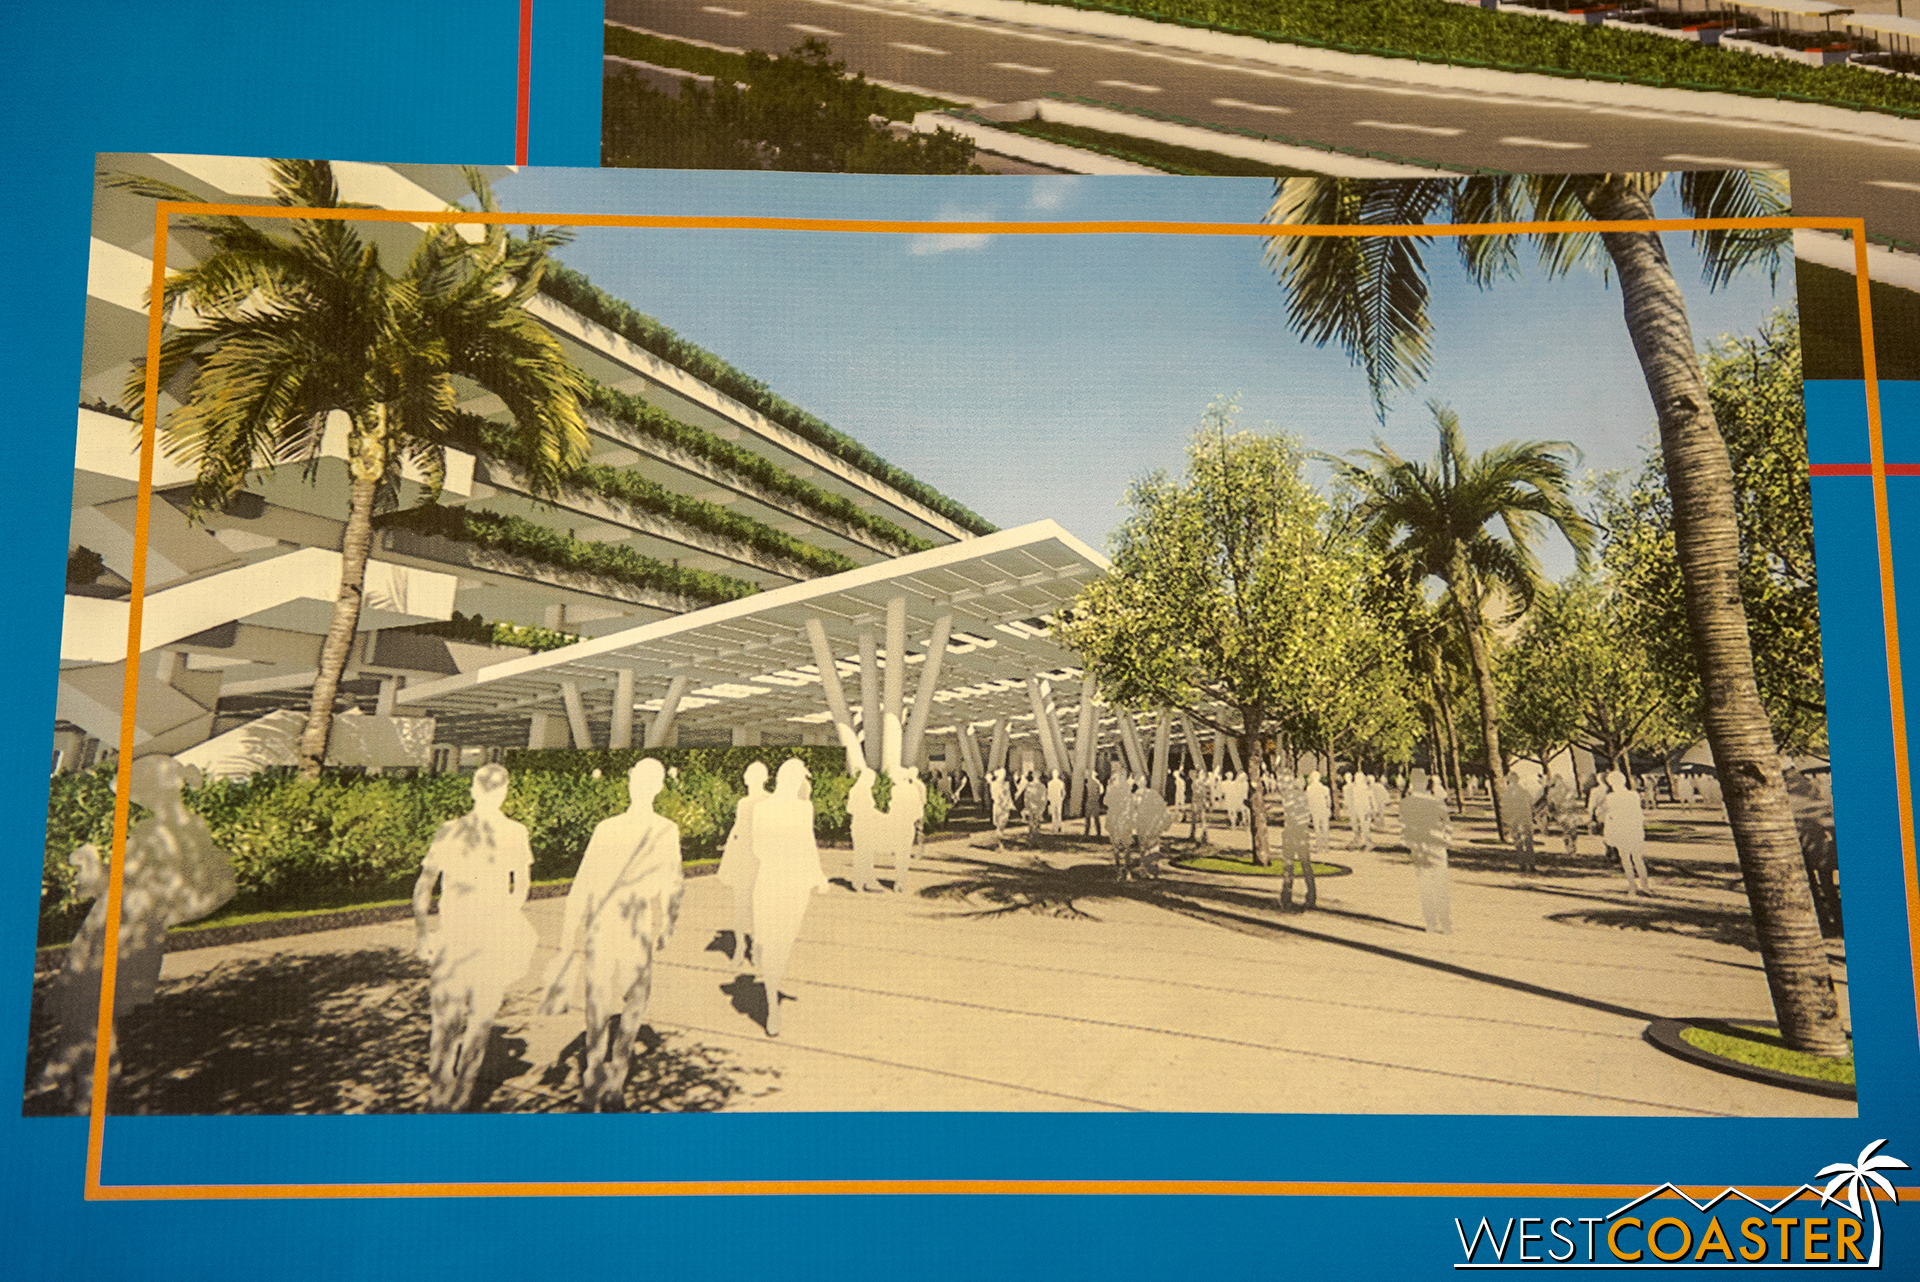  The loading promenade will look like this by the new structure. 